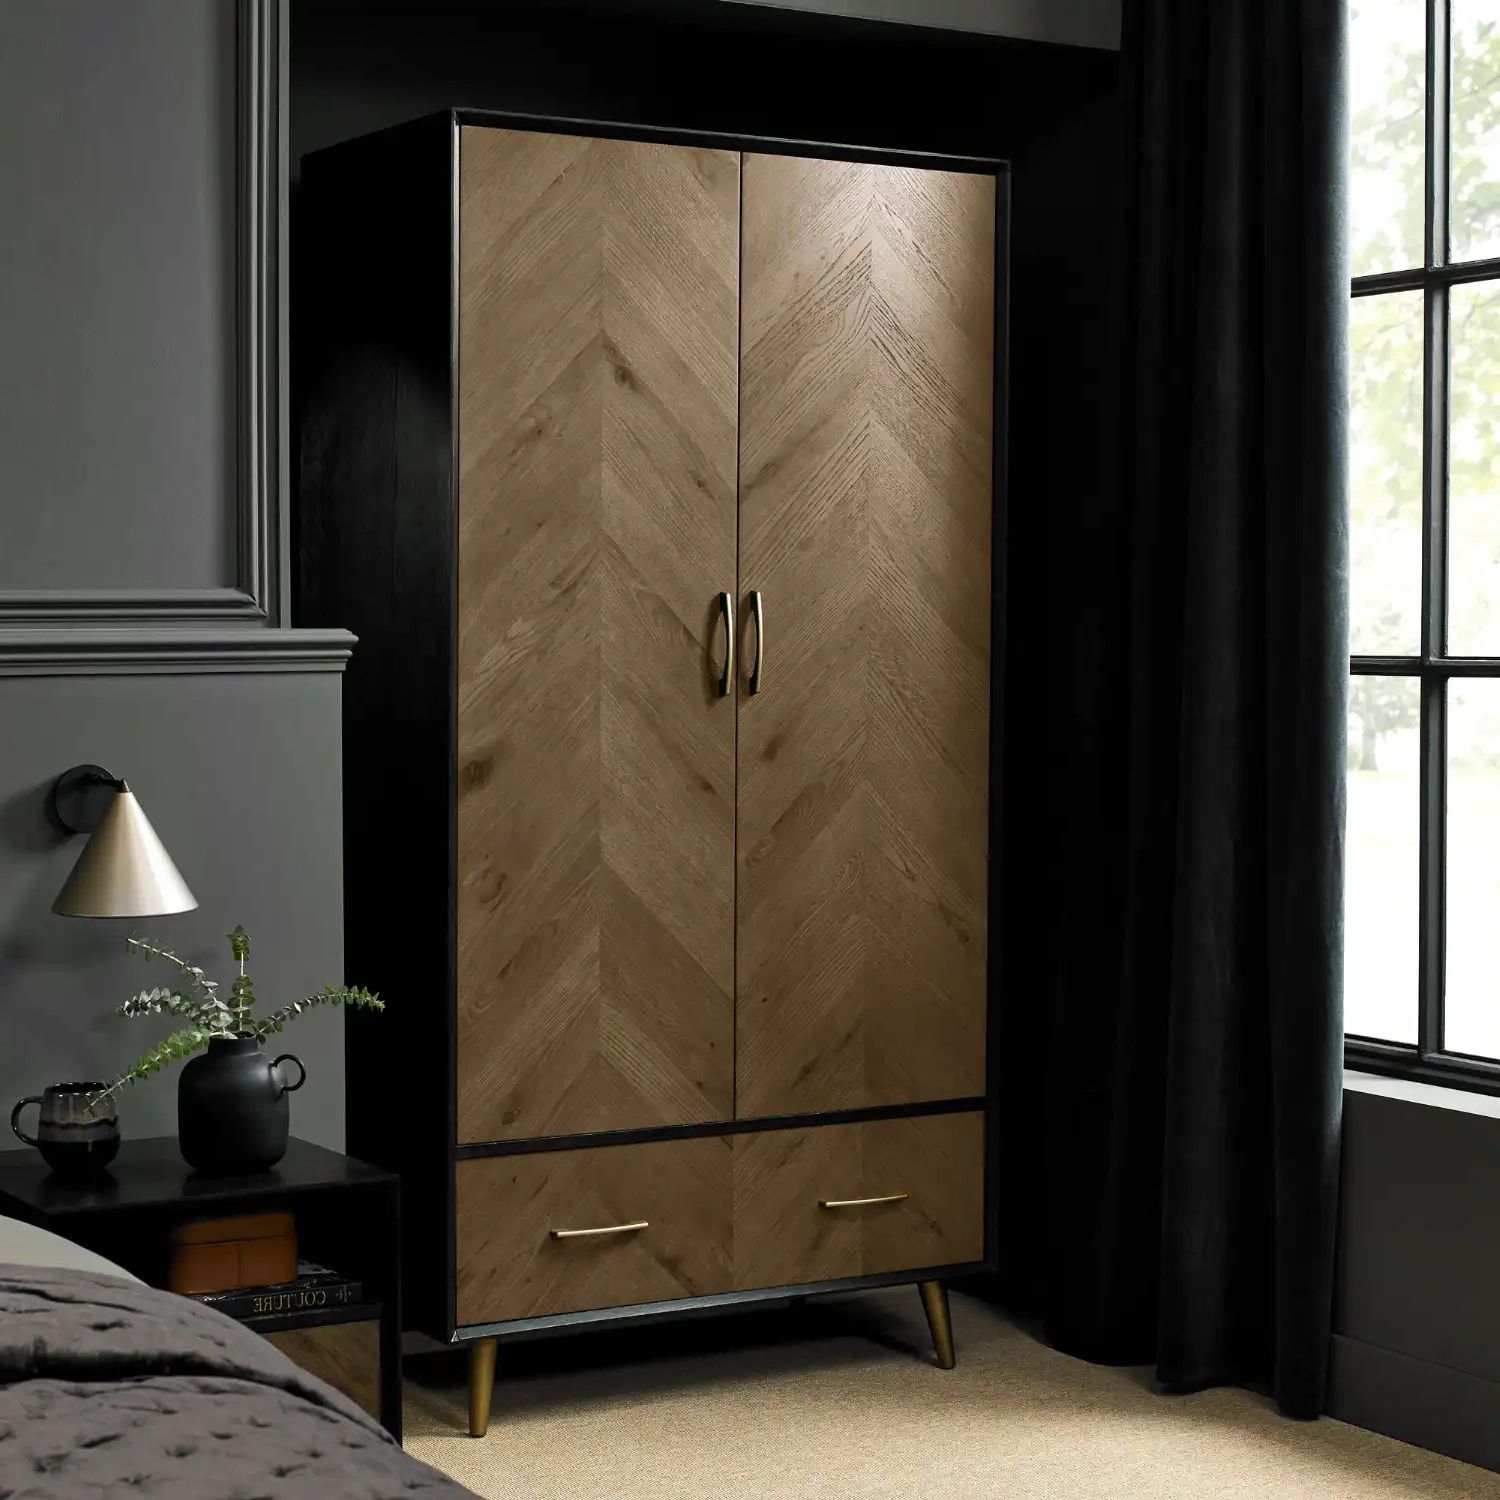 Dark Oak And Black Double 2 Door 1 Drawer Wardrobe – Ellis Home Interiors With Dark Wood Wardrobes With Drawers (View 4 of 20)